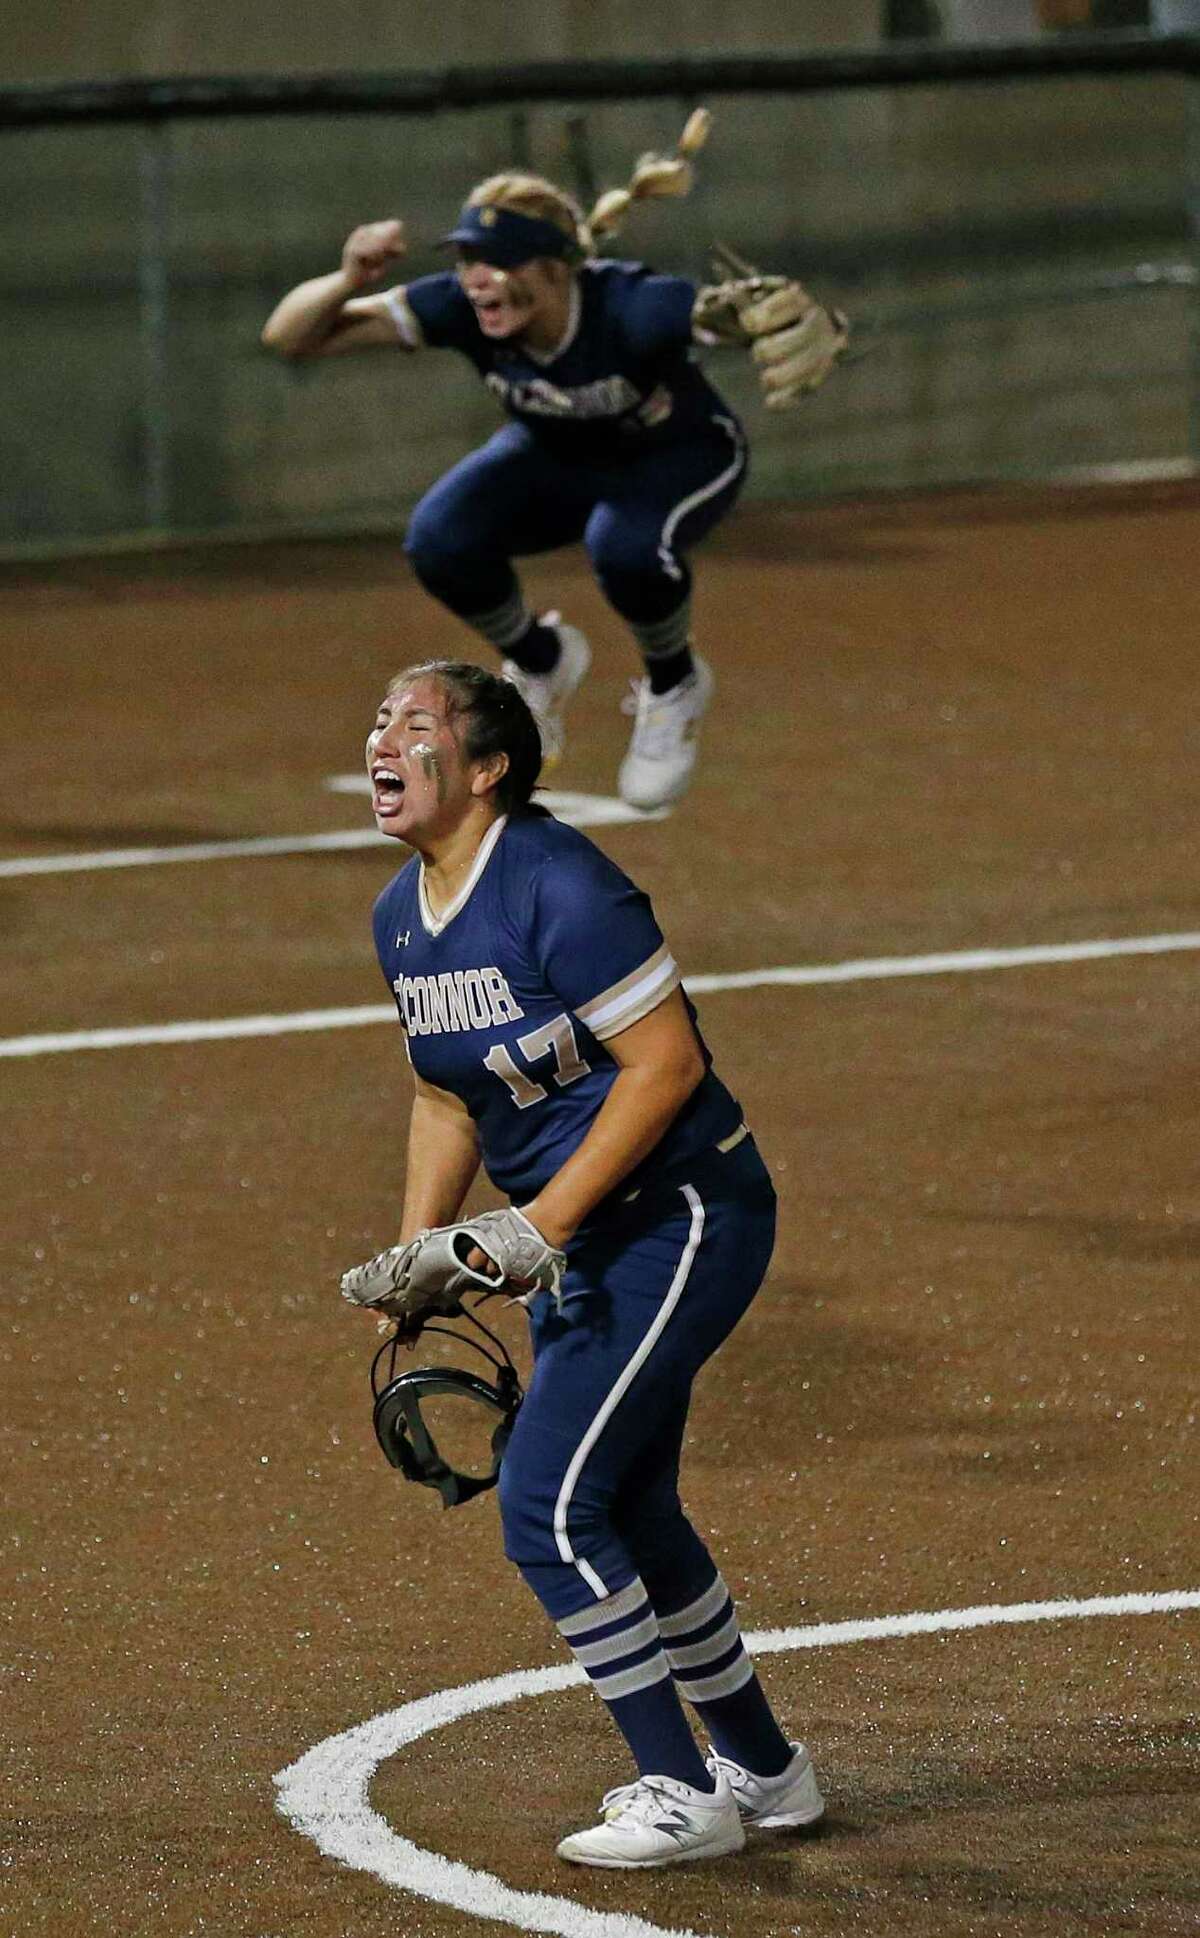 O’Connor pitcher Sammie Portillo (17) celebrates after striking out the last batter to end the game In a 6A Regional IV quarterfinals High School Softball as O'Connor defeated Brennan 12-3 at Northside Field on Friday, May 13, 2022.